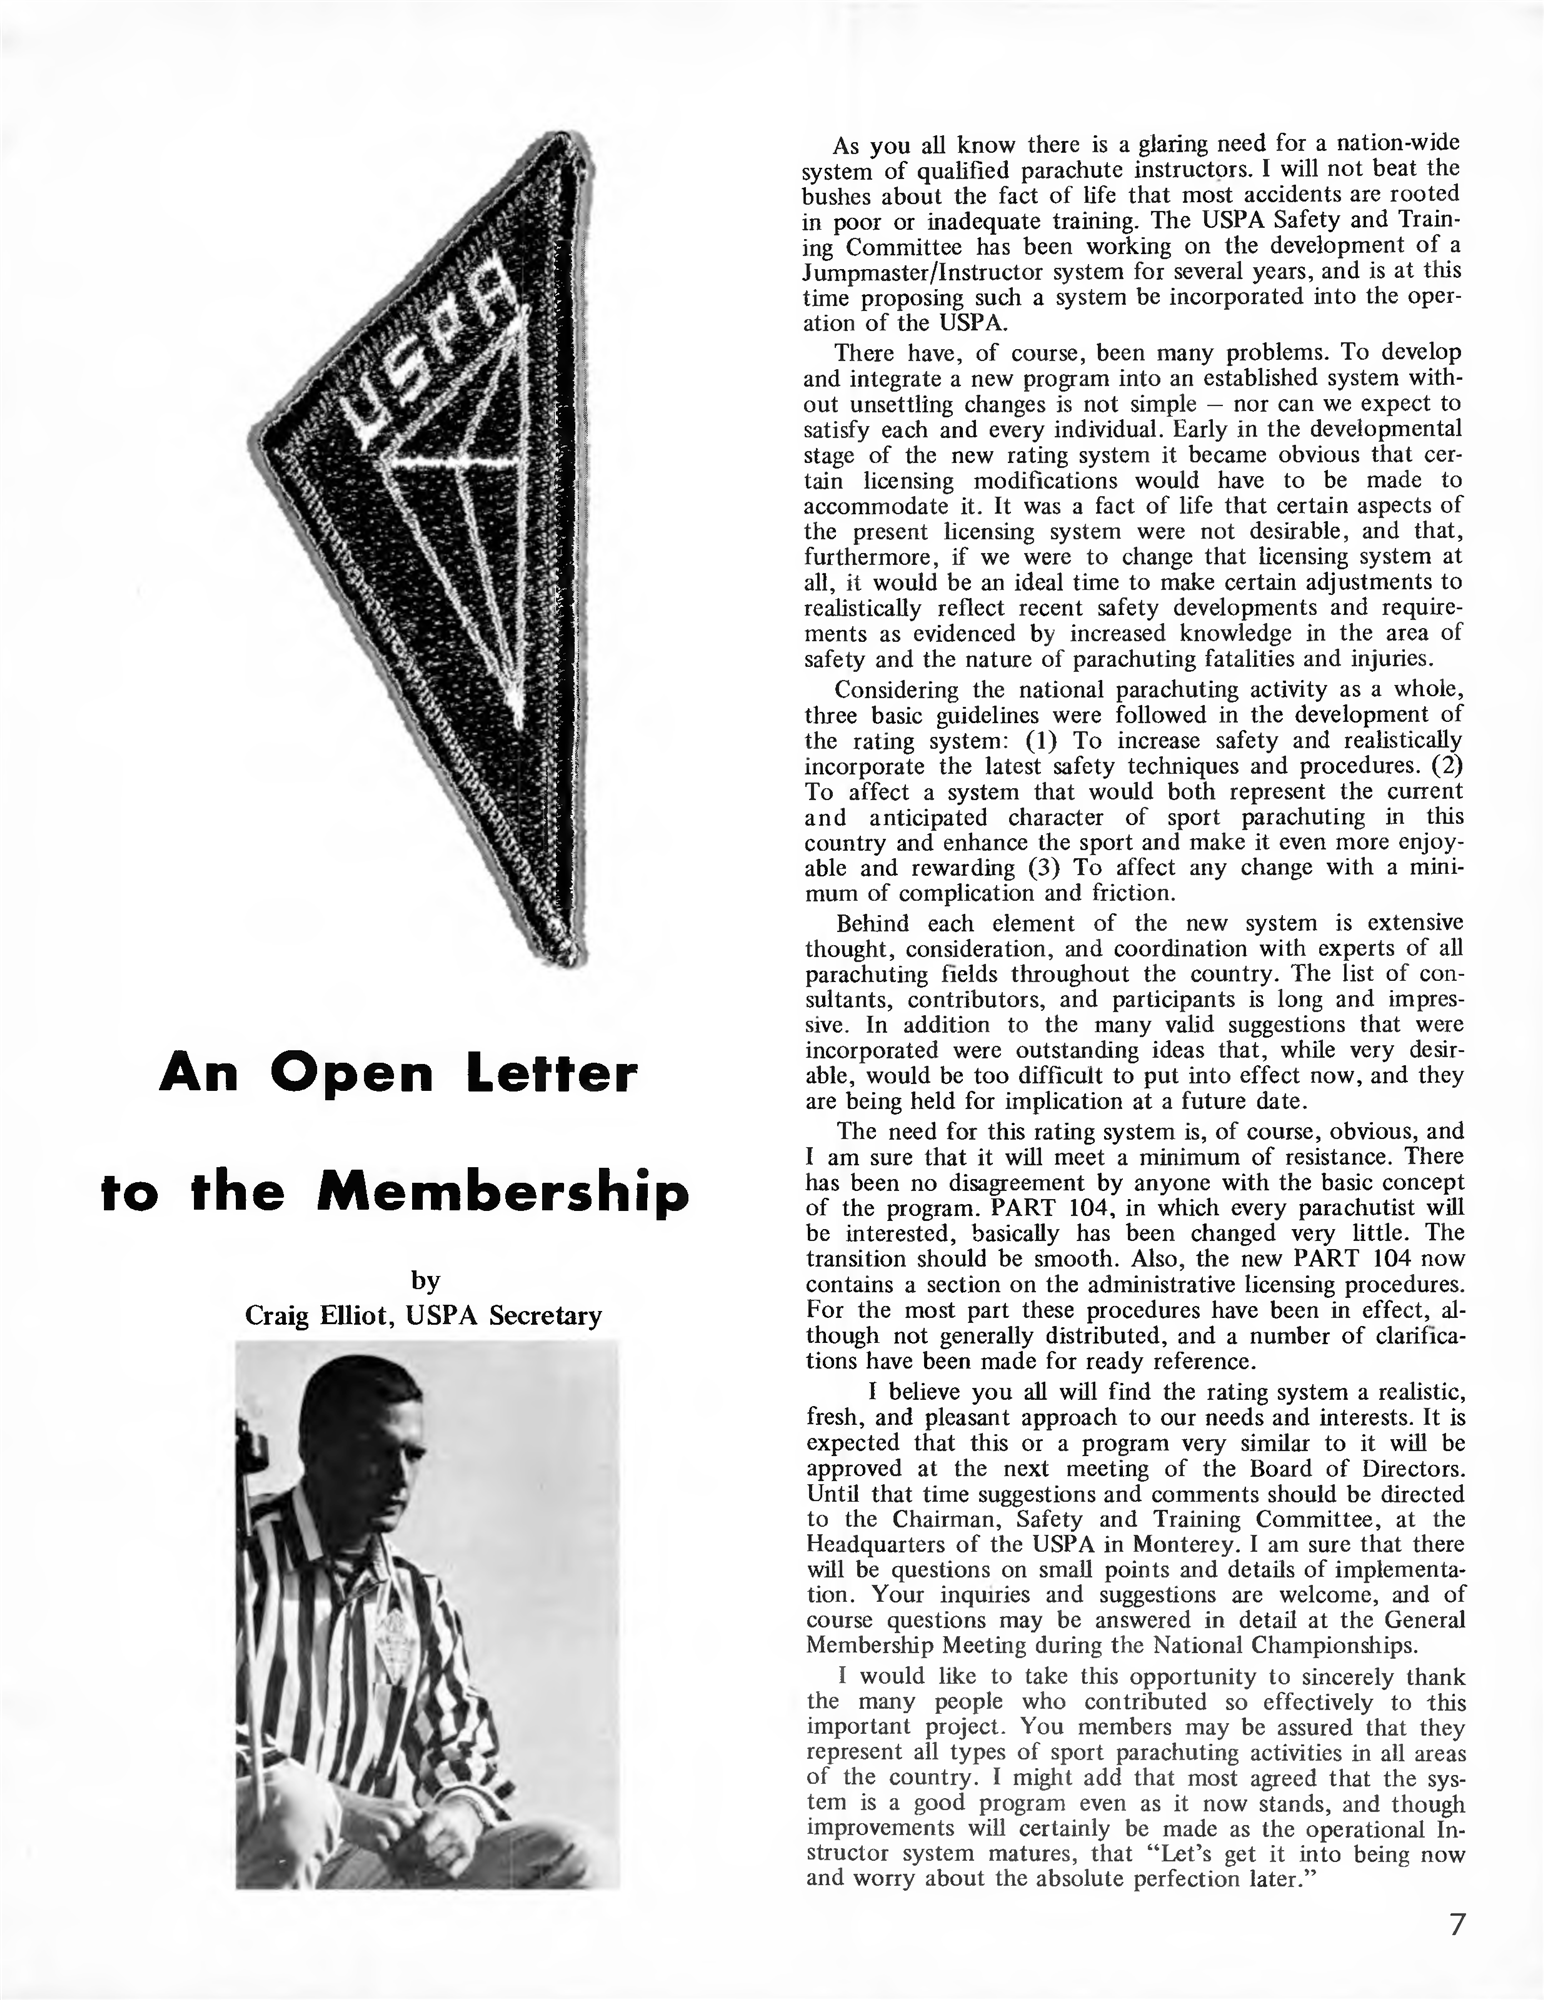 An Open Letter to the Membership